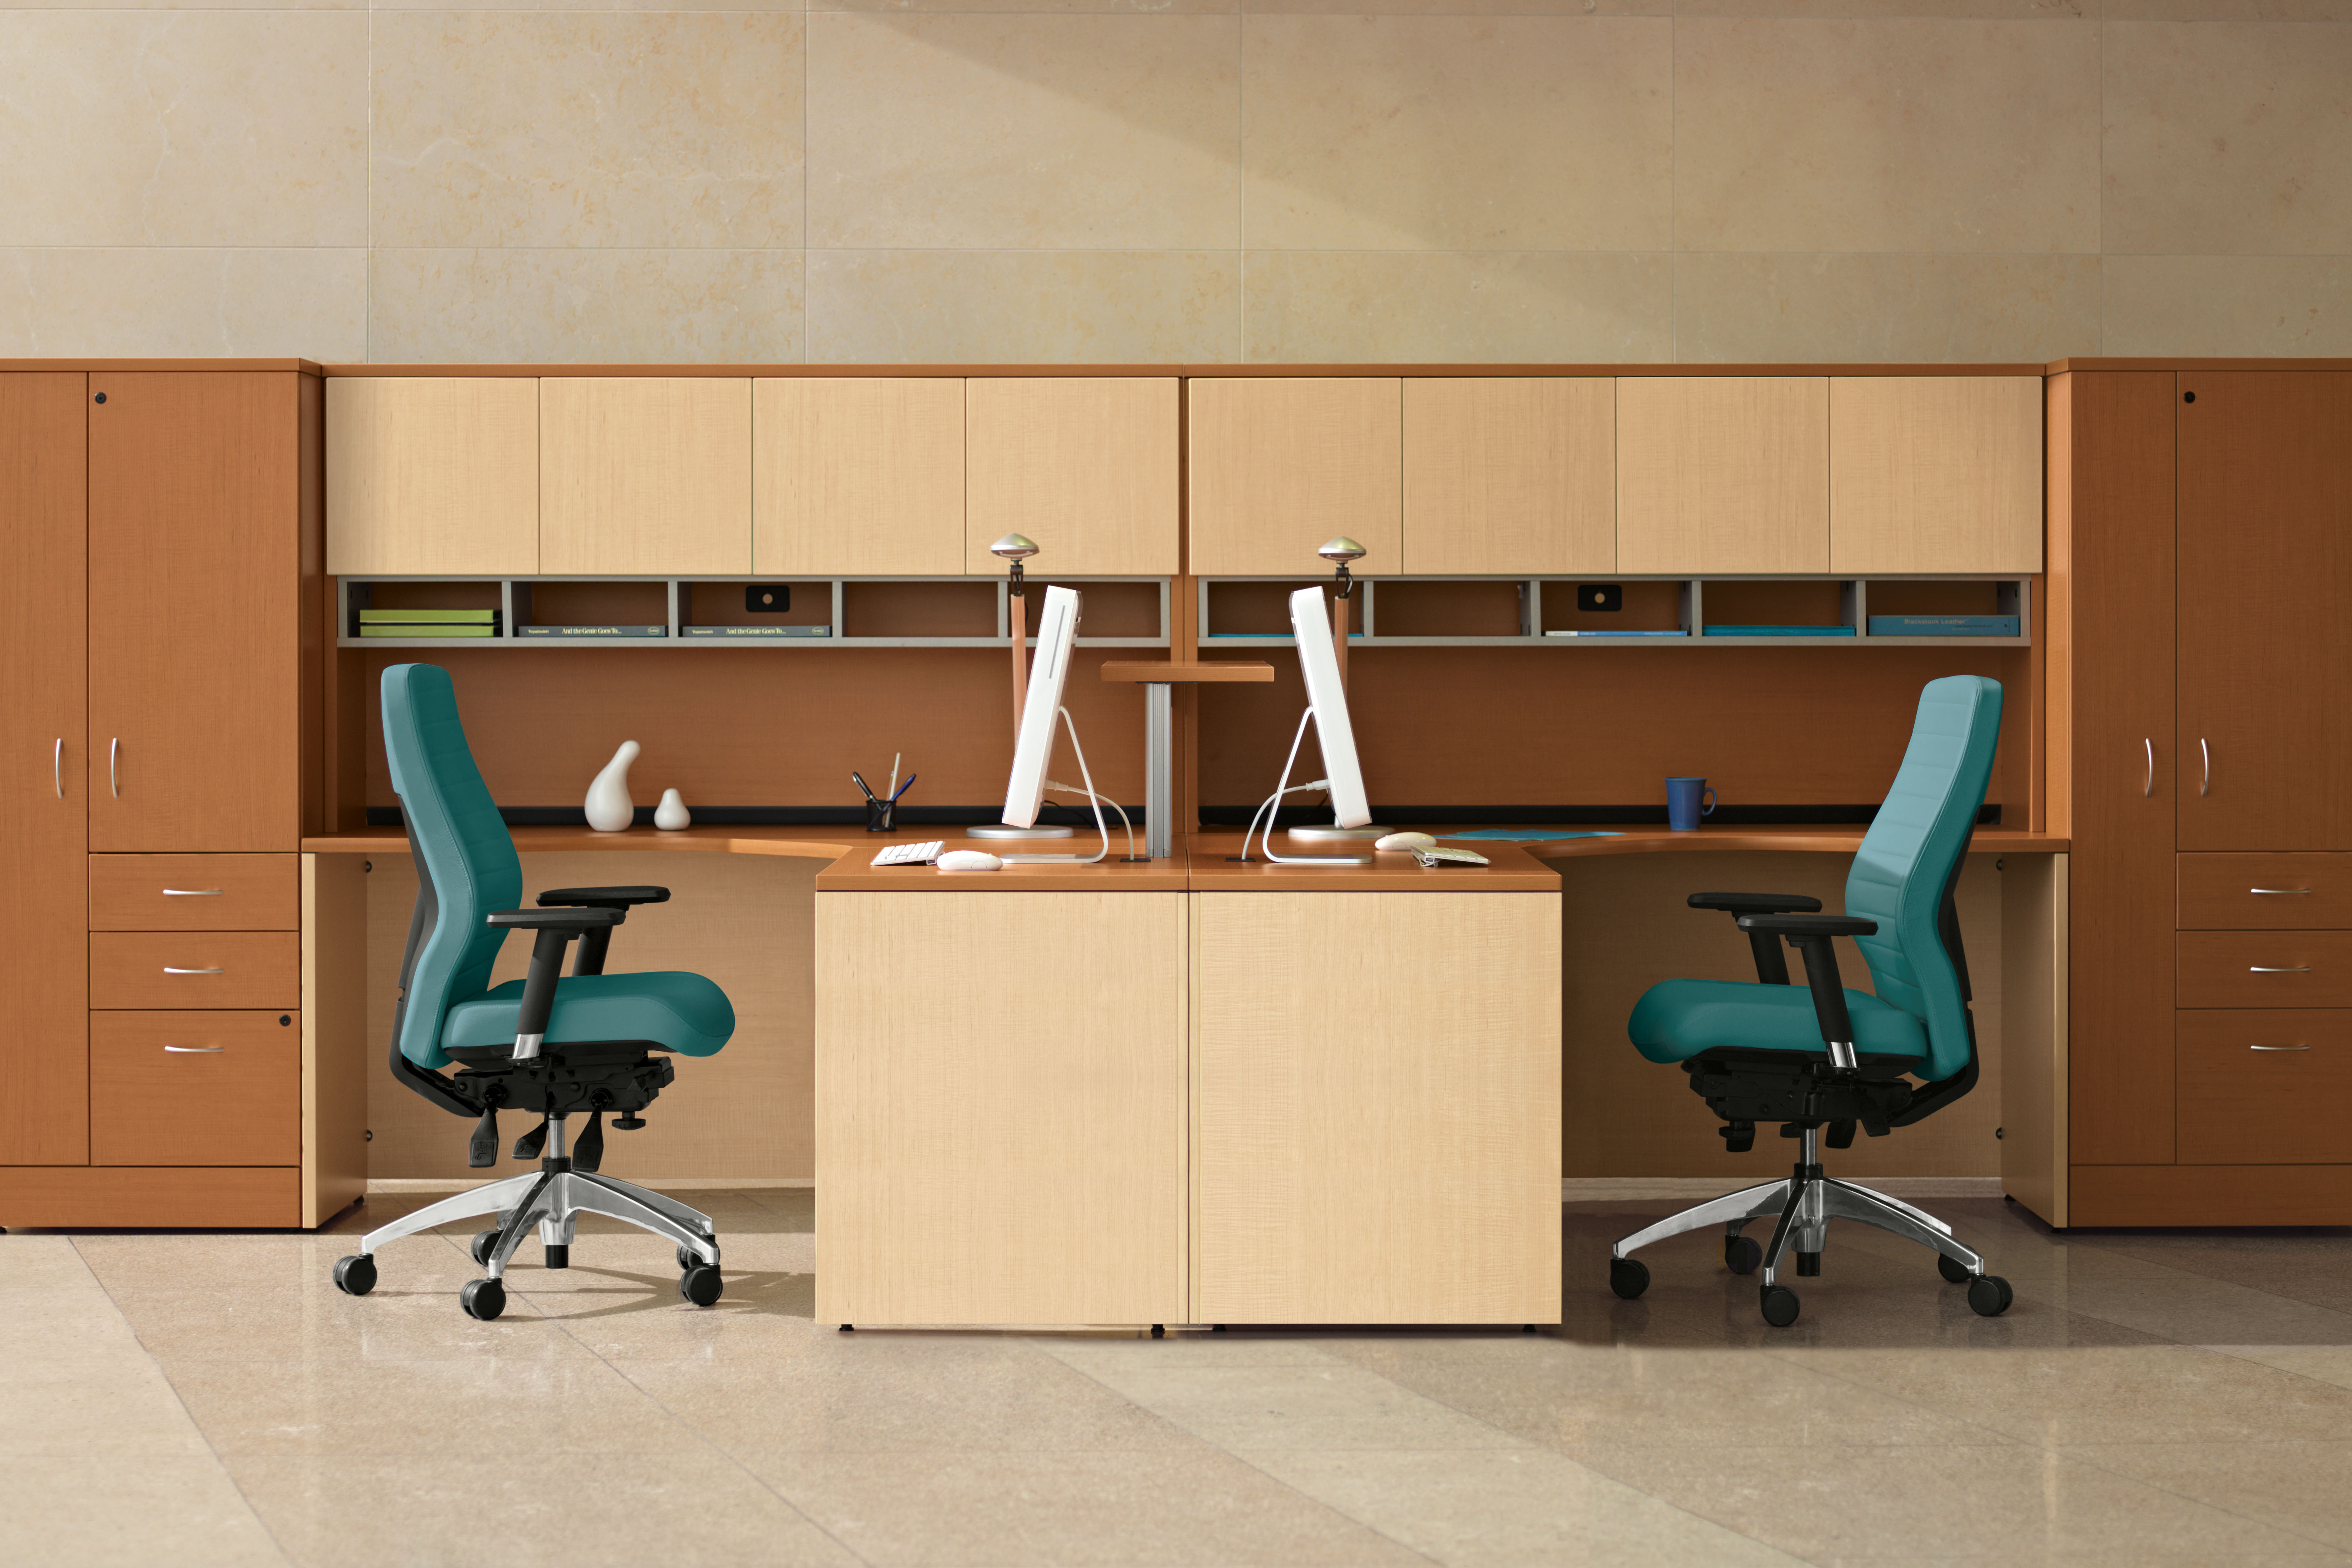 Global Furniture Group, Adaptabilities® meets your needs – from reception areas to executive offices. With hundreds of